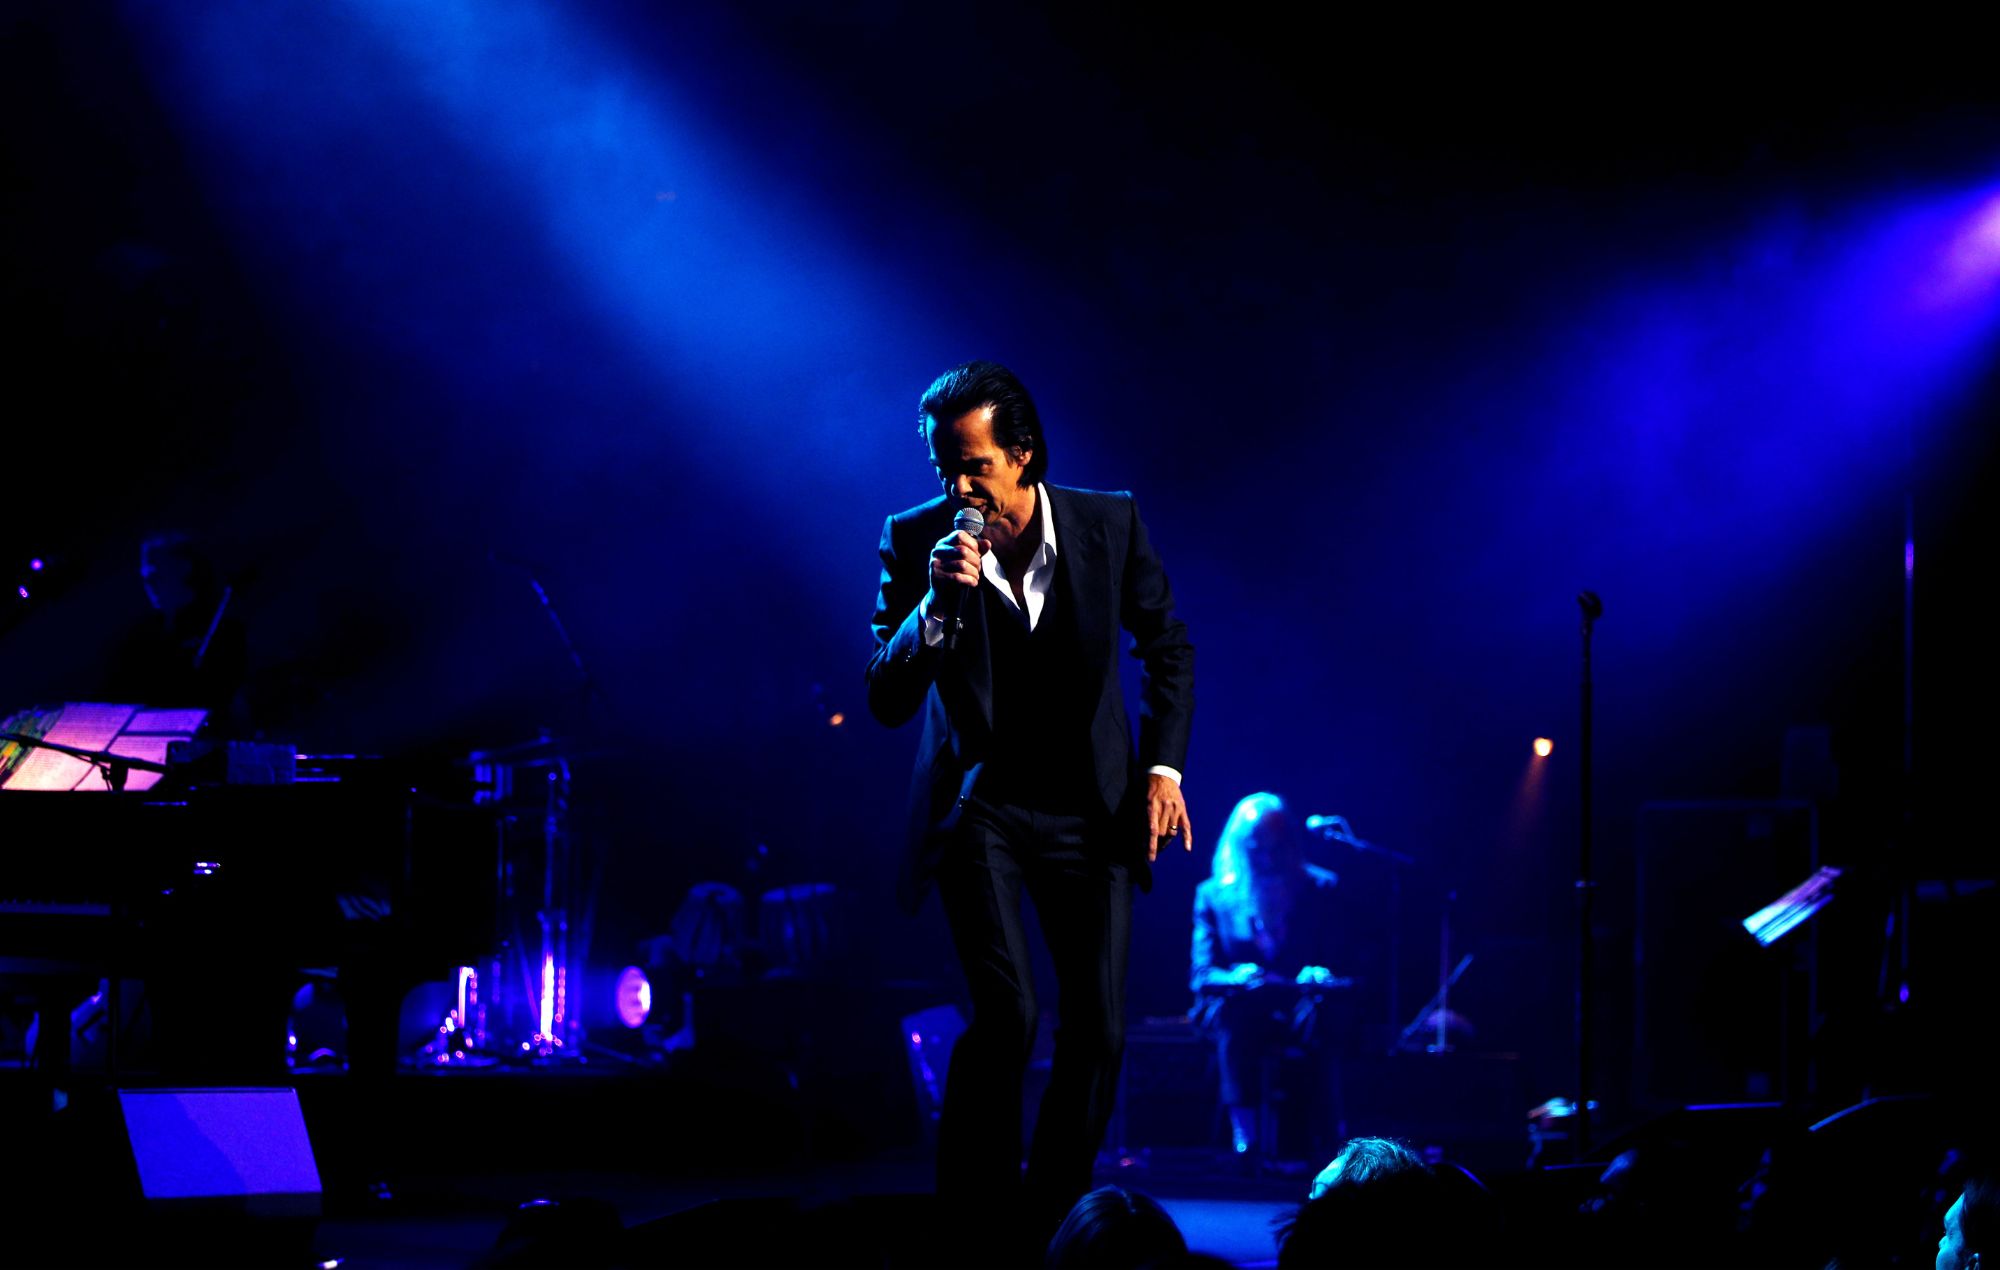 Nick Cave of Nick Cave And The Bad Seeds performs on stage during All Points East at Victoria Park on August 28, 2022 in London, England.